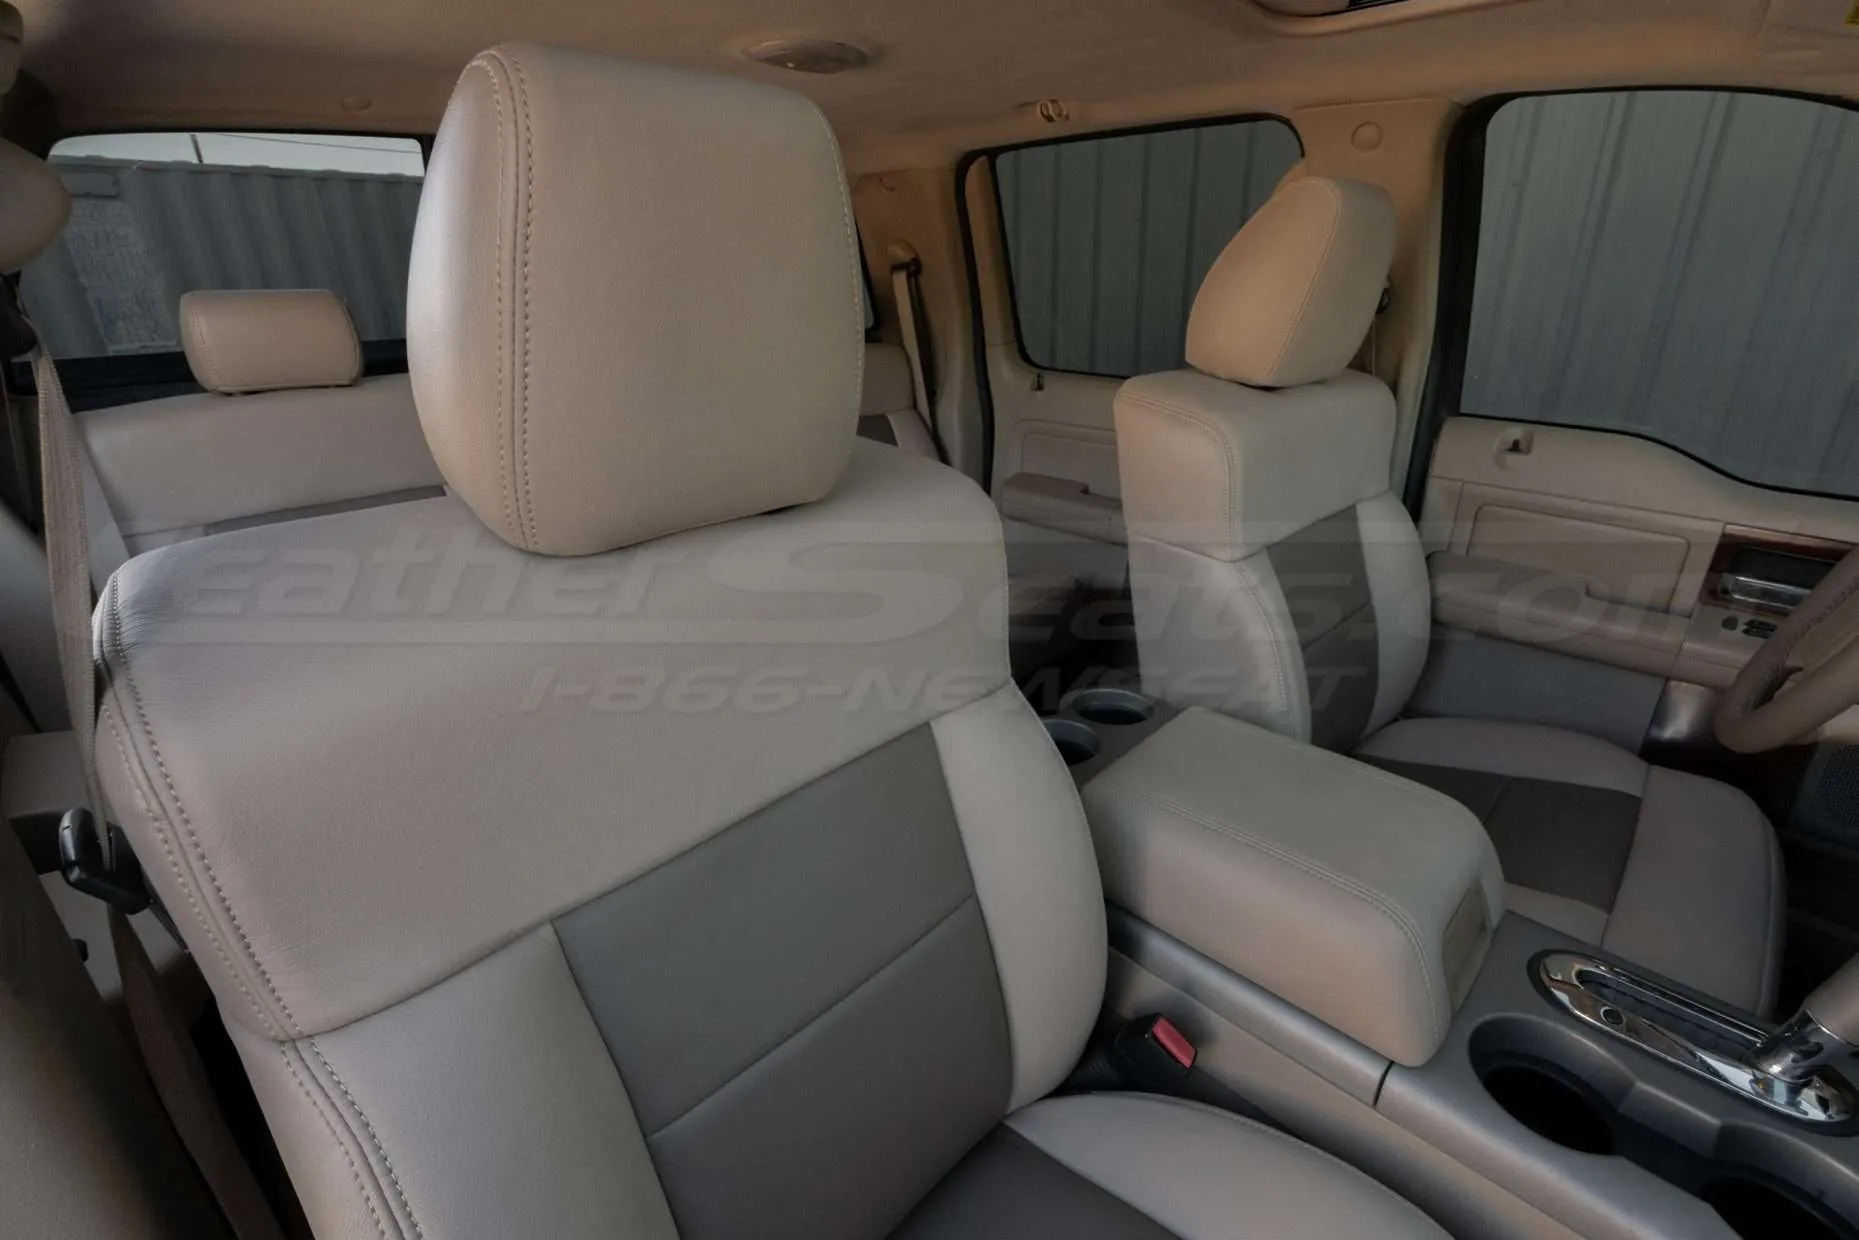 Front backrest and headrest section of Ford F-150 with LeatherSeats.com interior